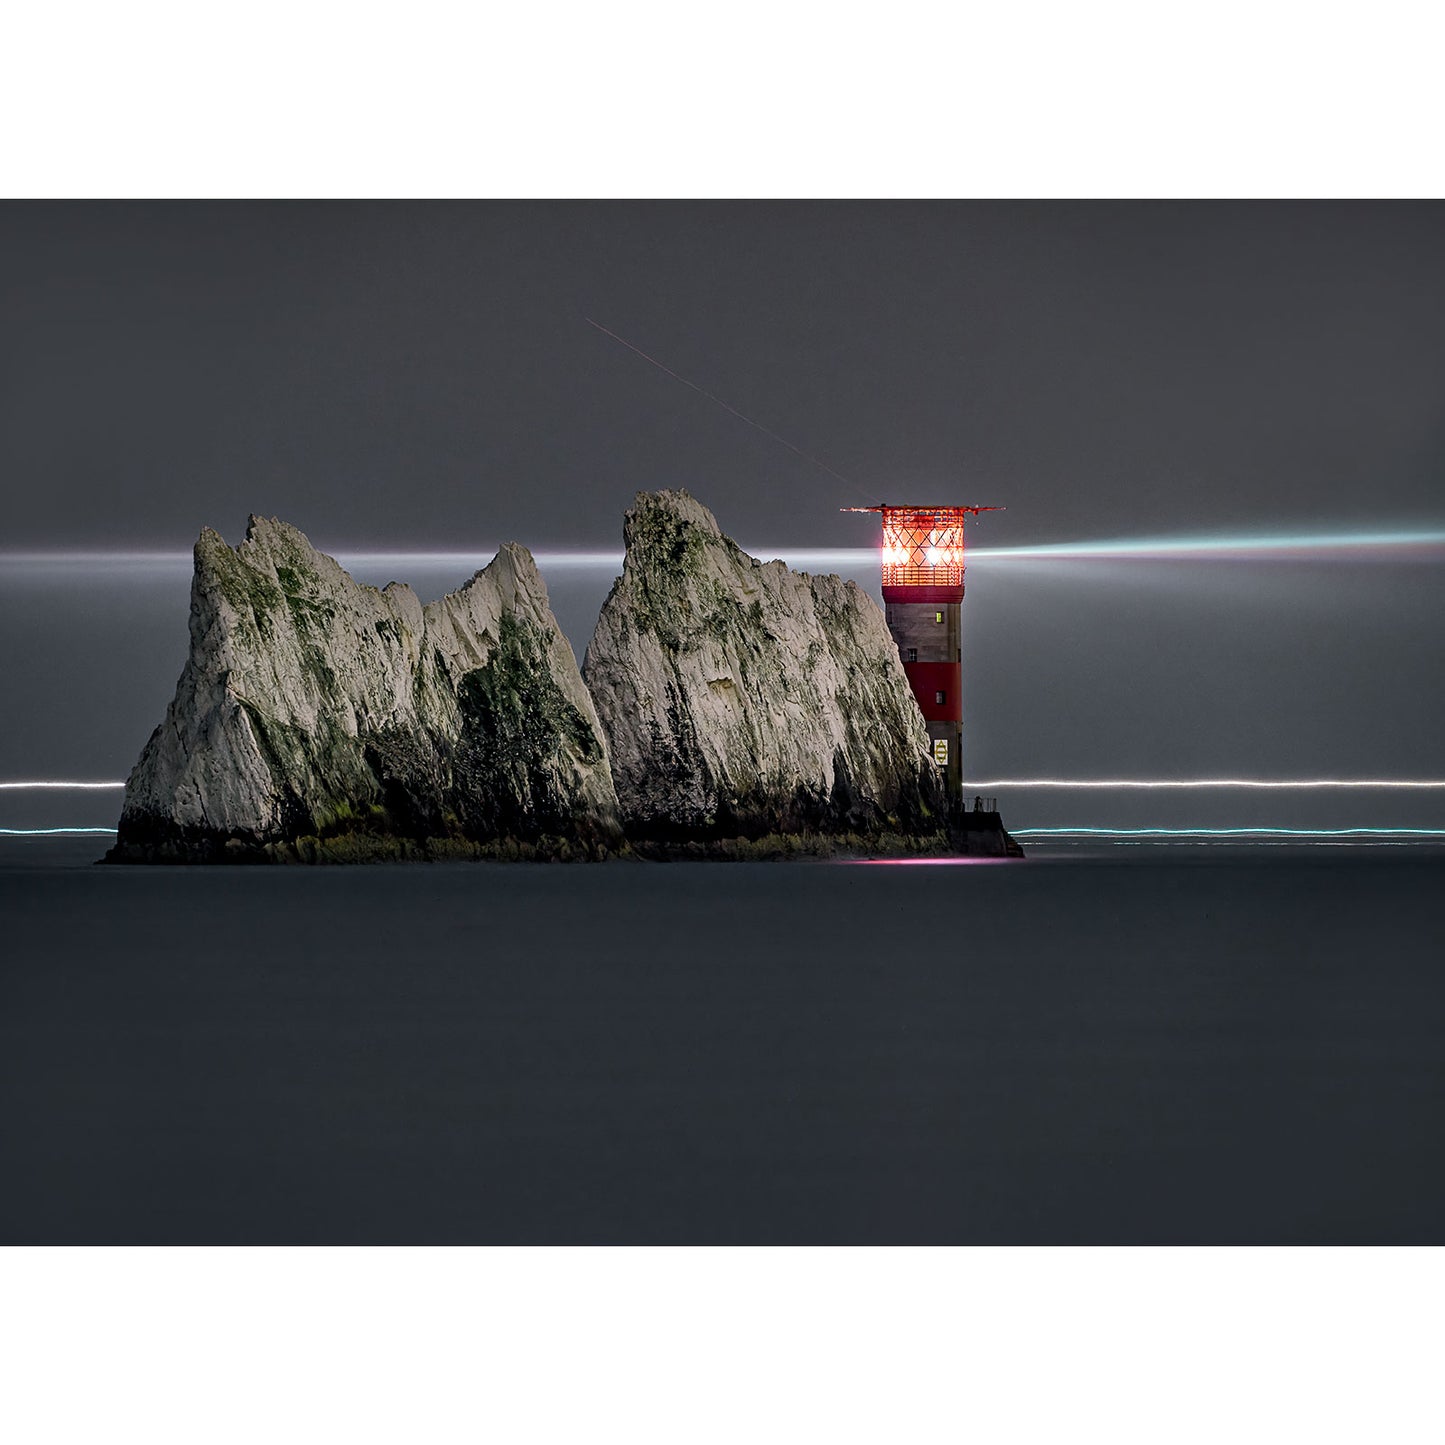 A lighthouse atop a craggy isle at night, with a long exposure capturing a streak of light from a passing ship by Available Light Photography's The Needles.